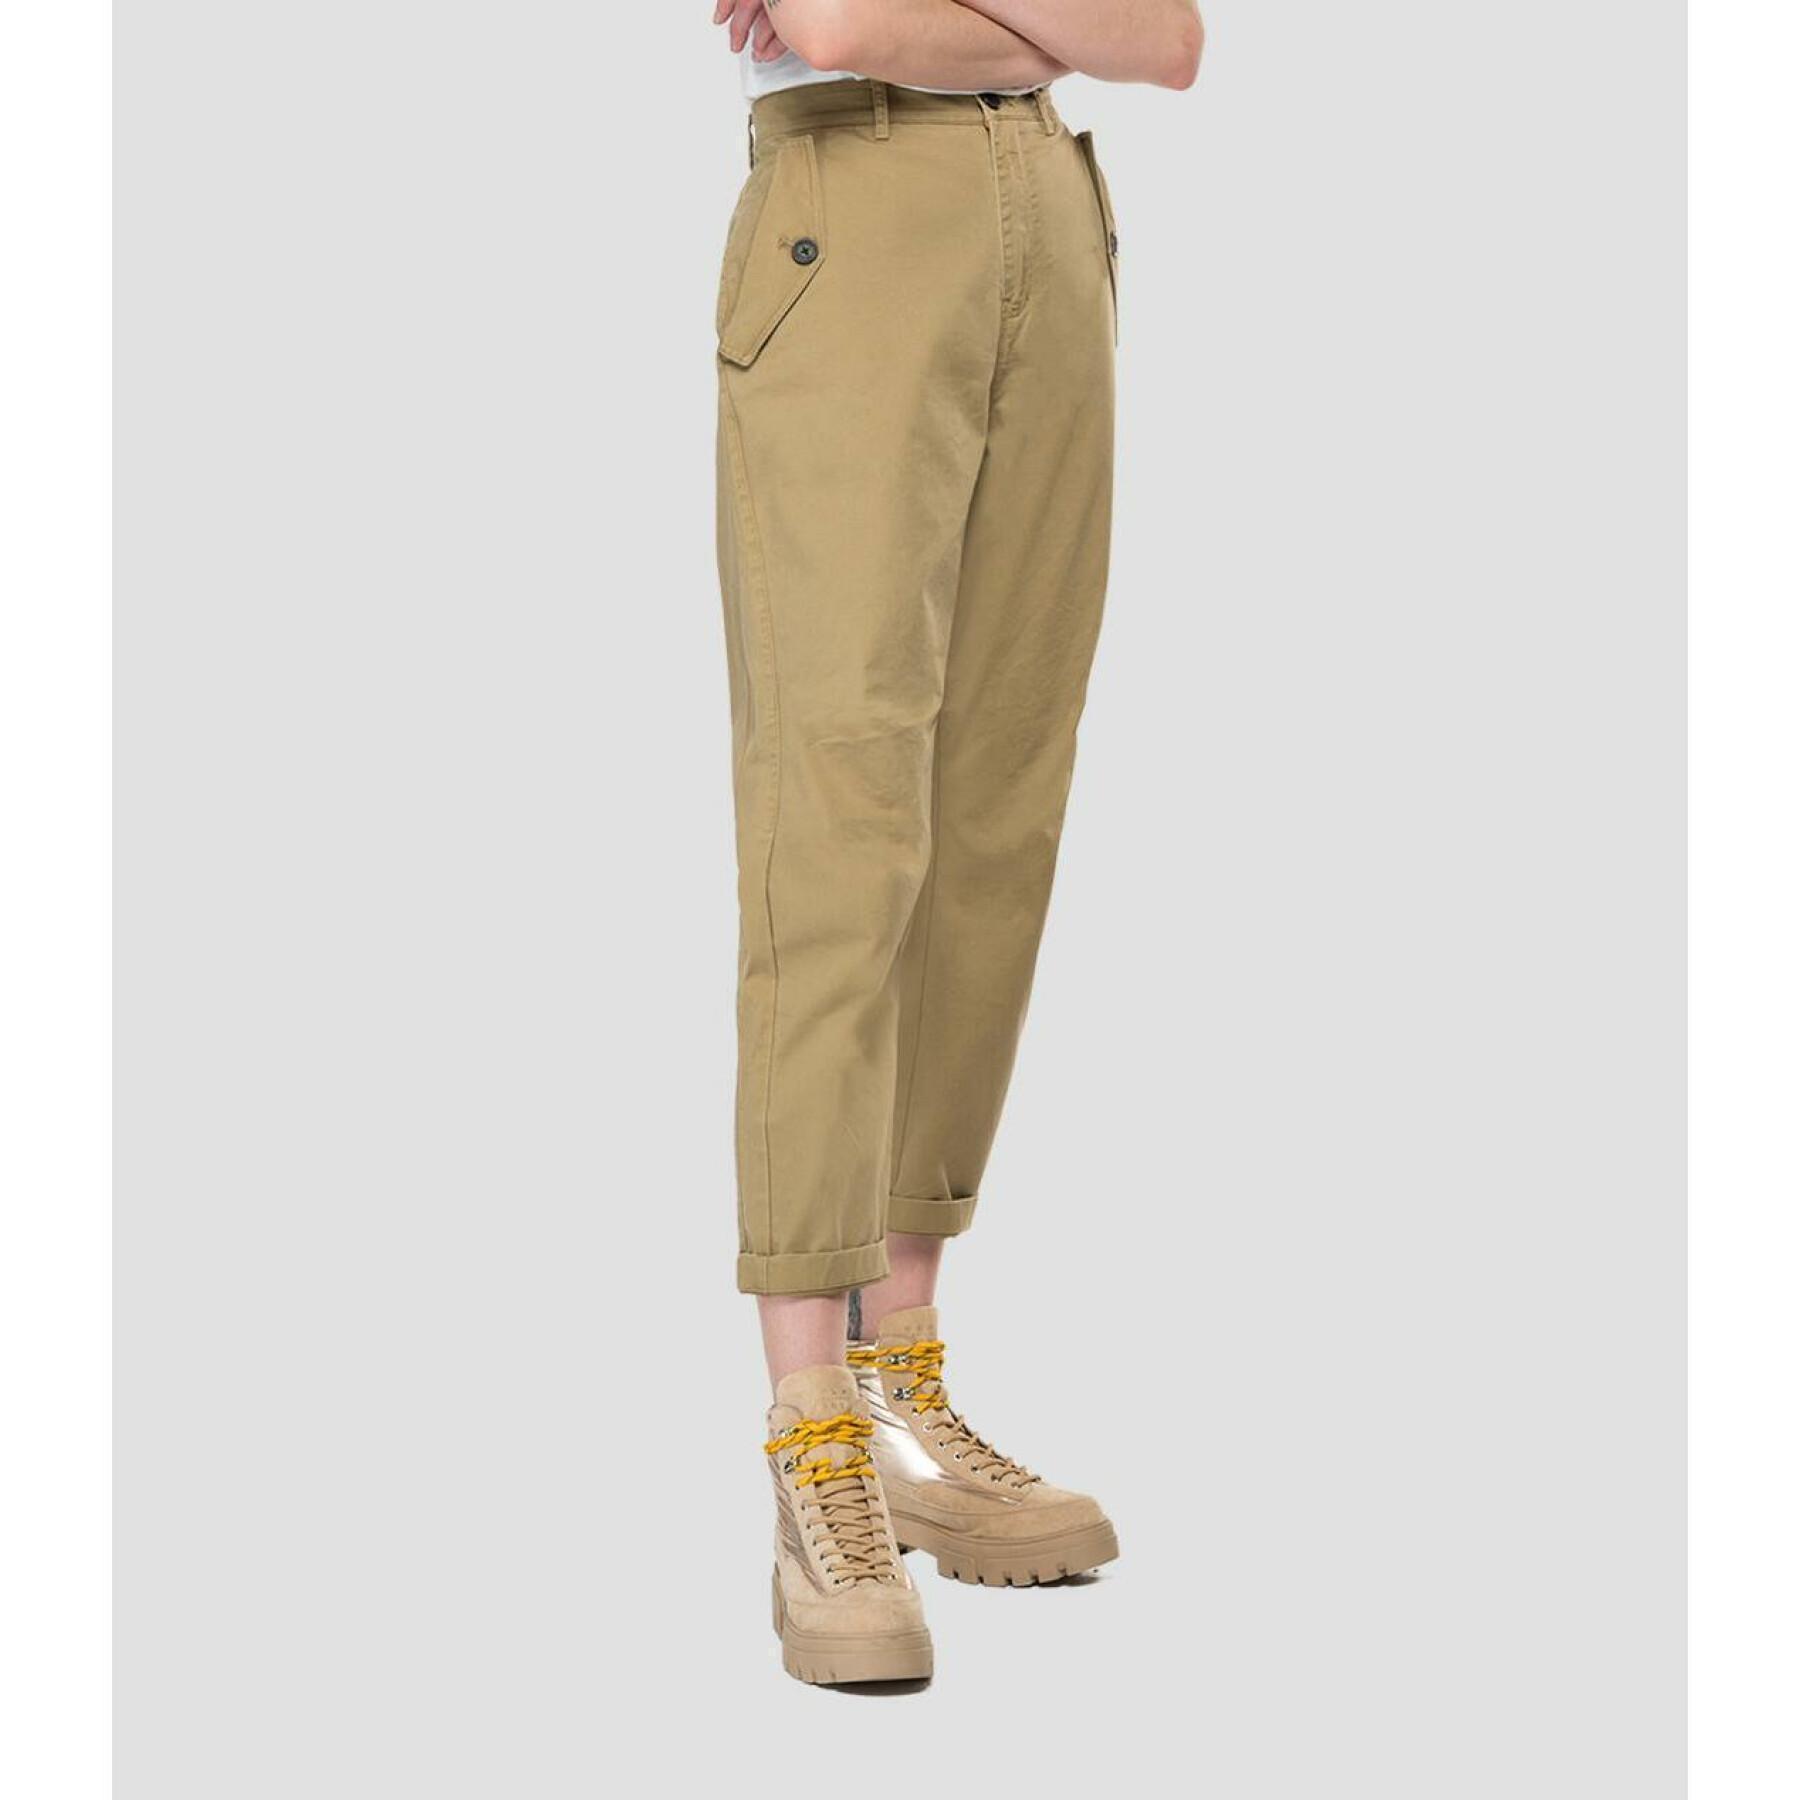 Women's high waist tapered trousers with pockets Replay